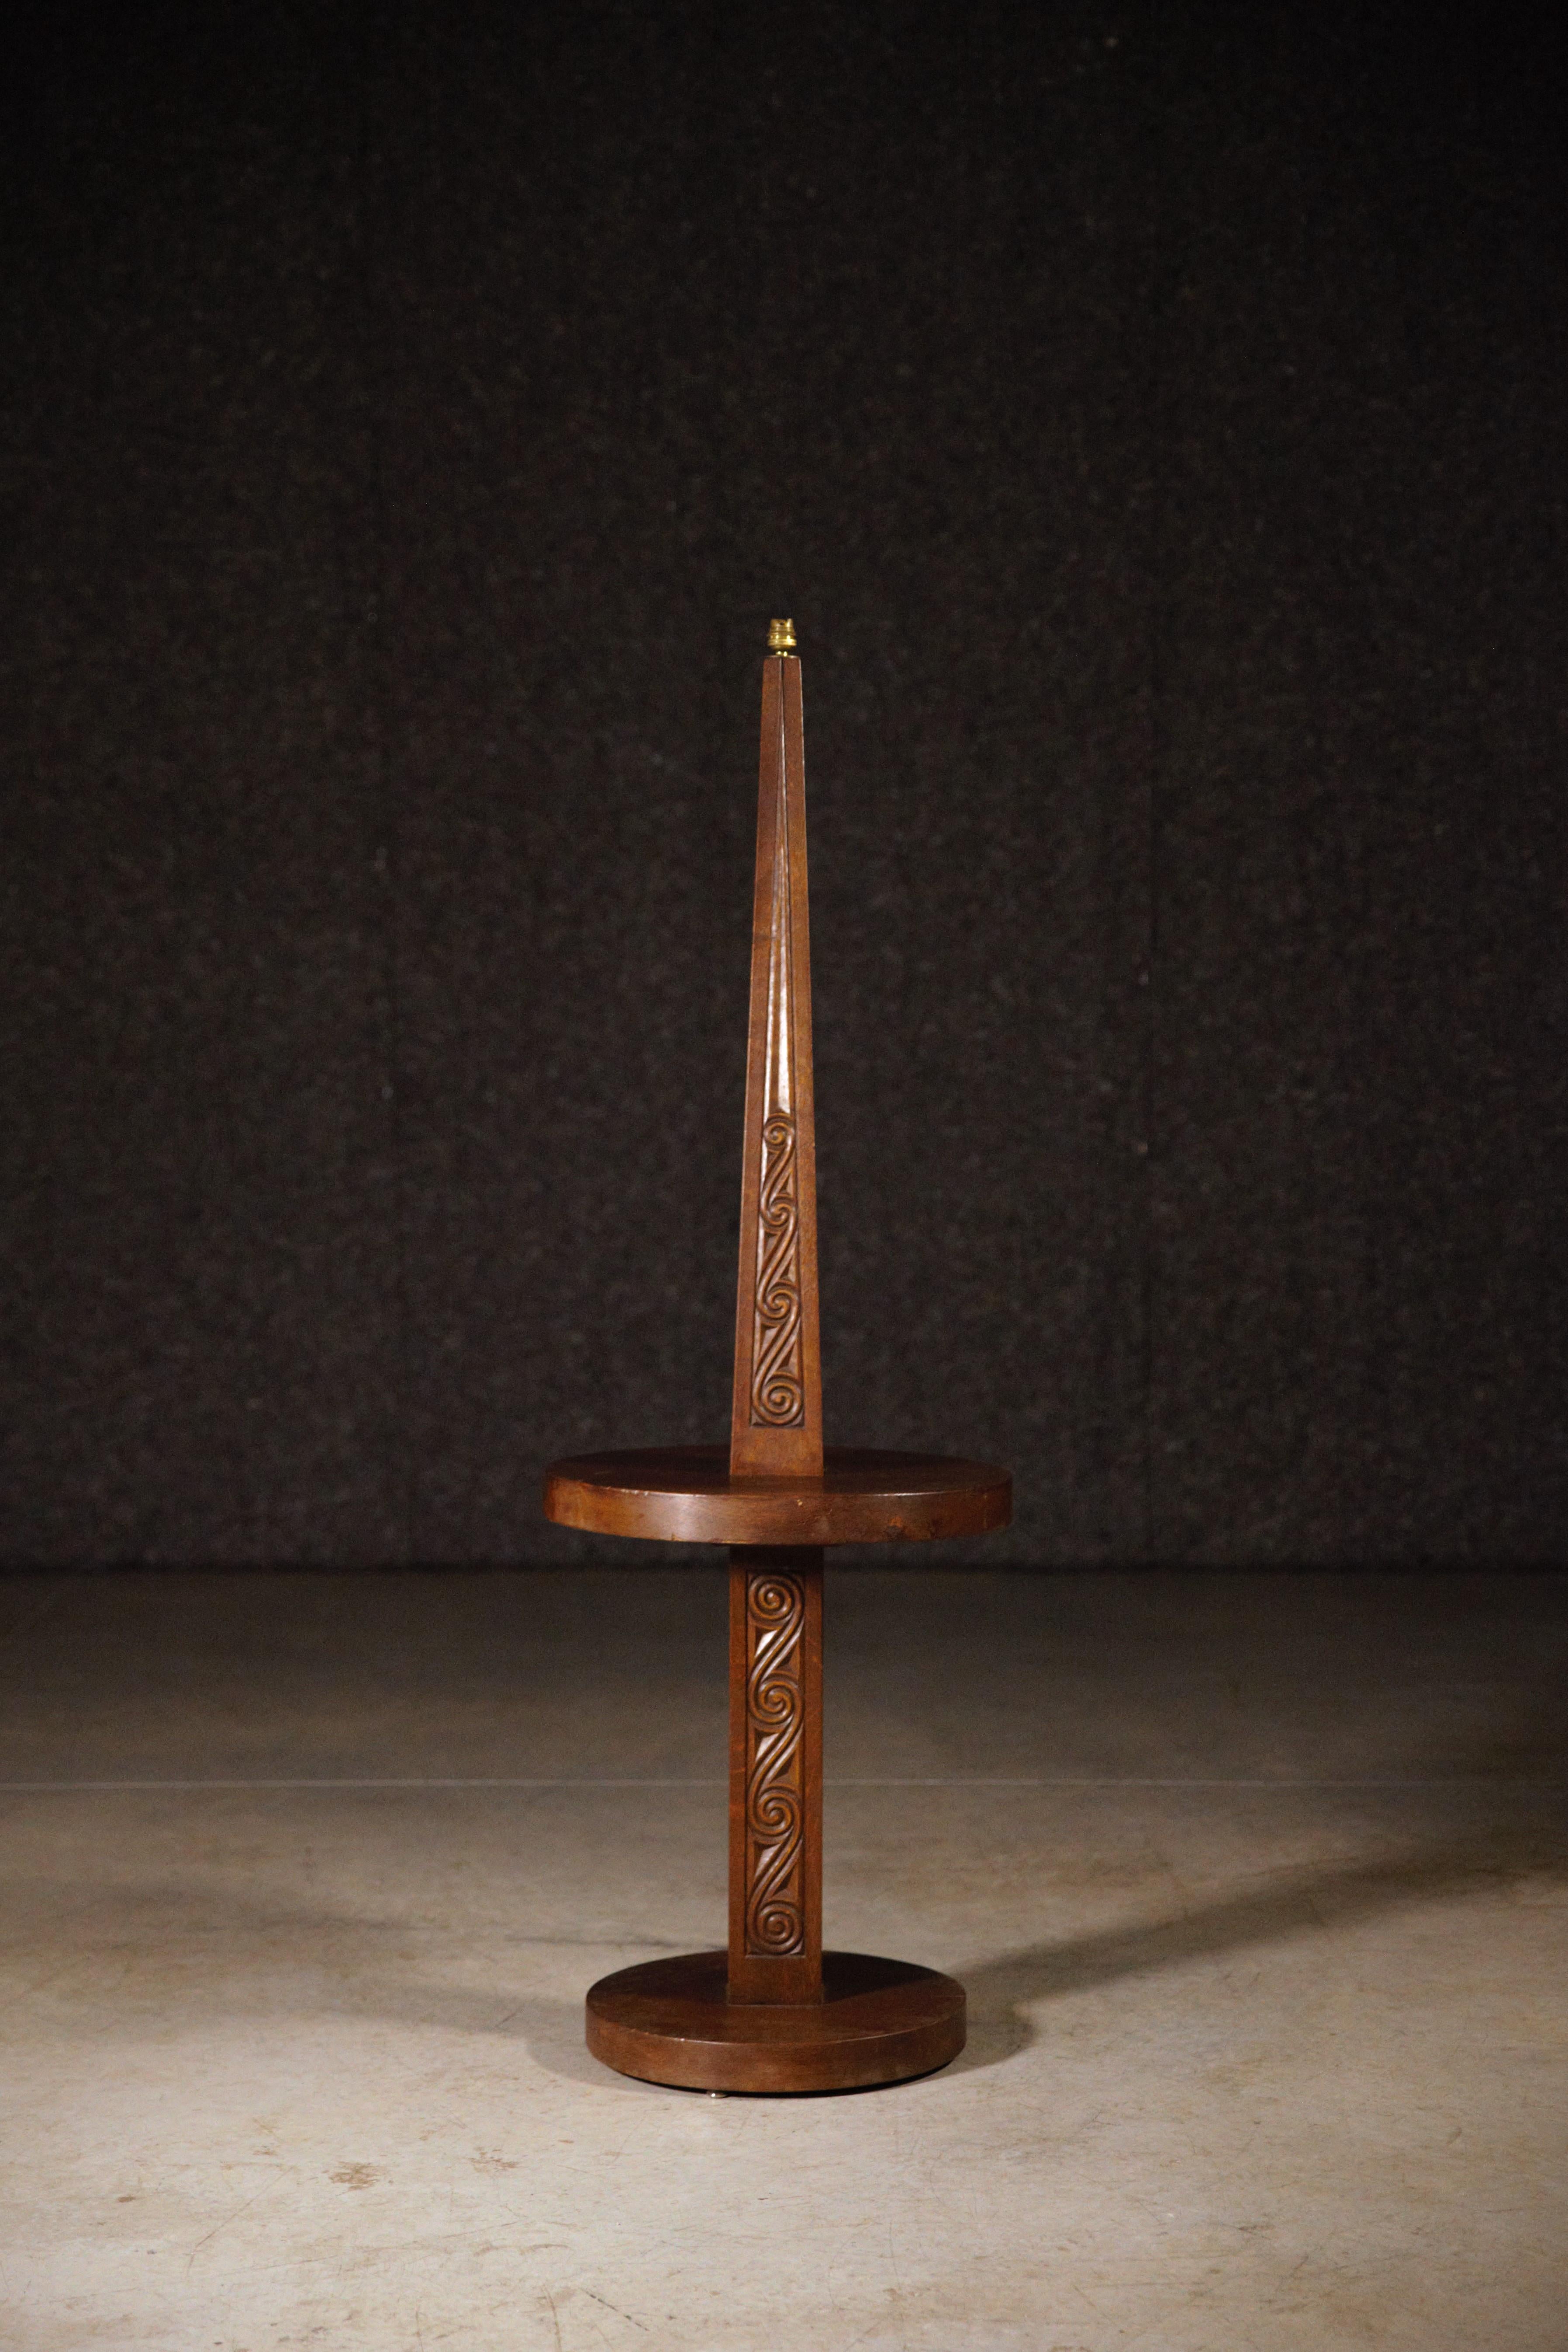 French A Celtic Floor Lamp by Joseph Savina 1960s For Sale